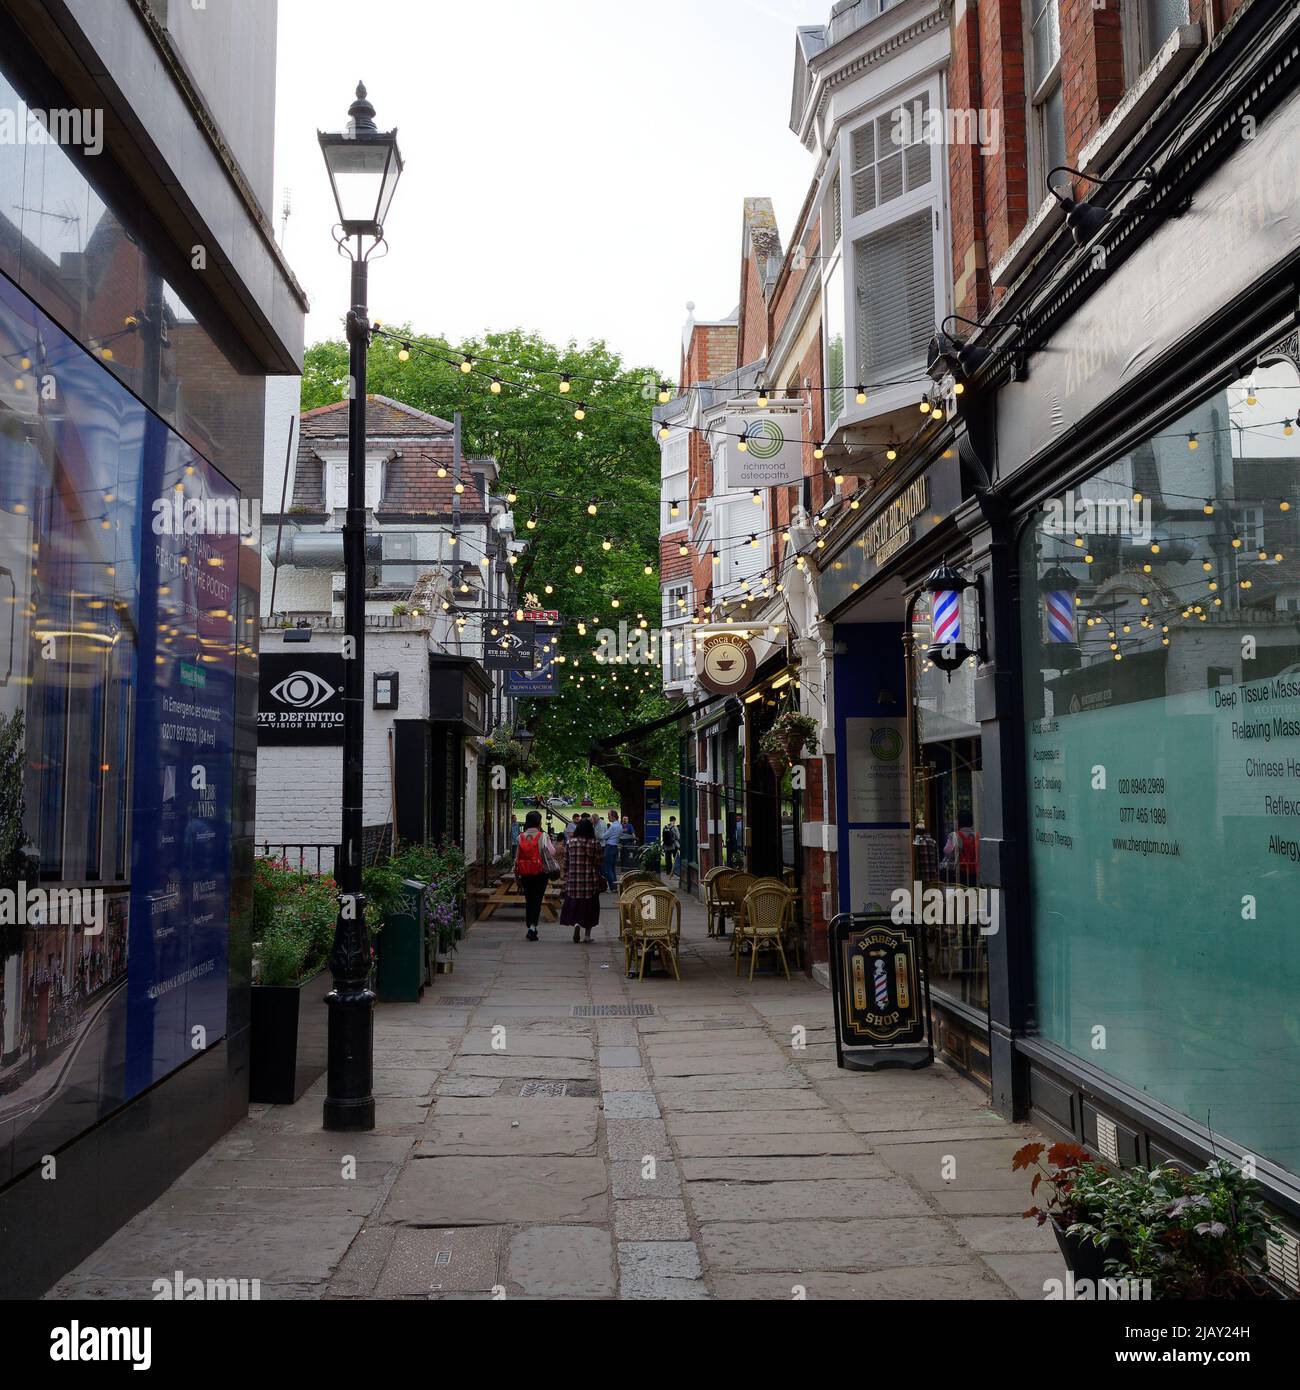 Richmond, Greater London, England, May 18 2022: Looking along a parade of shops and cafes with outdoor seating toward Richmond Green. Stock Photo